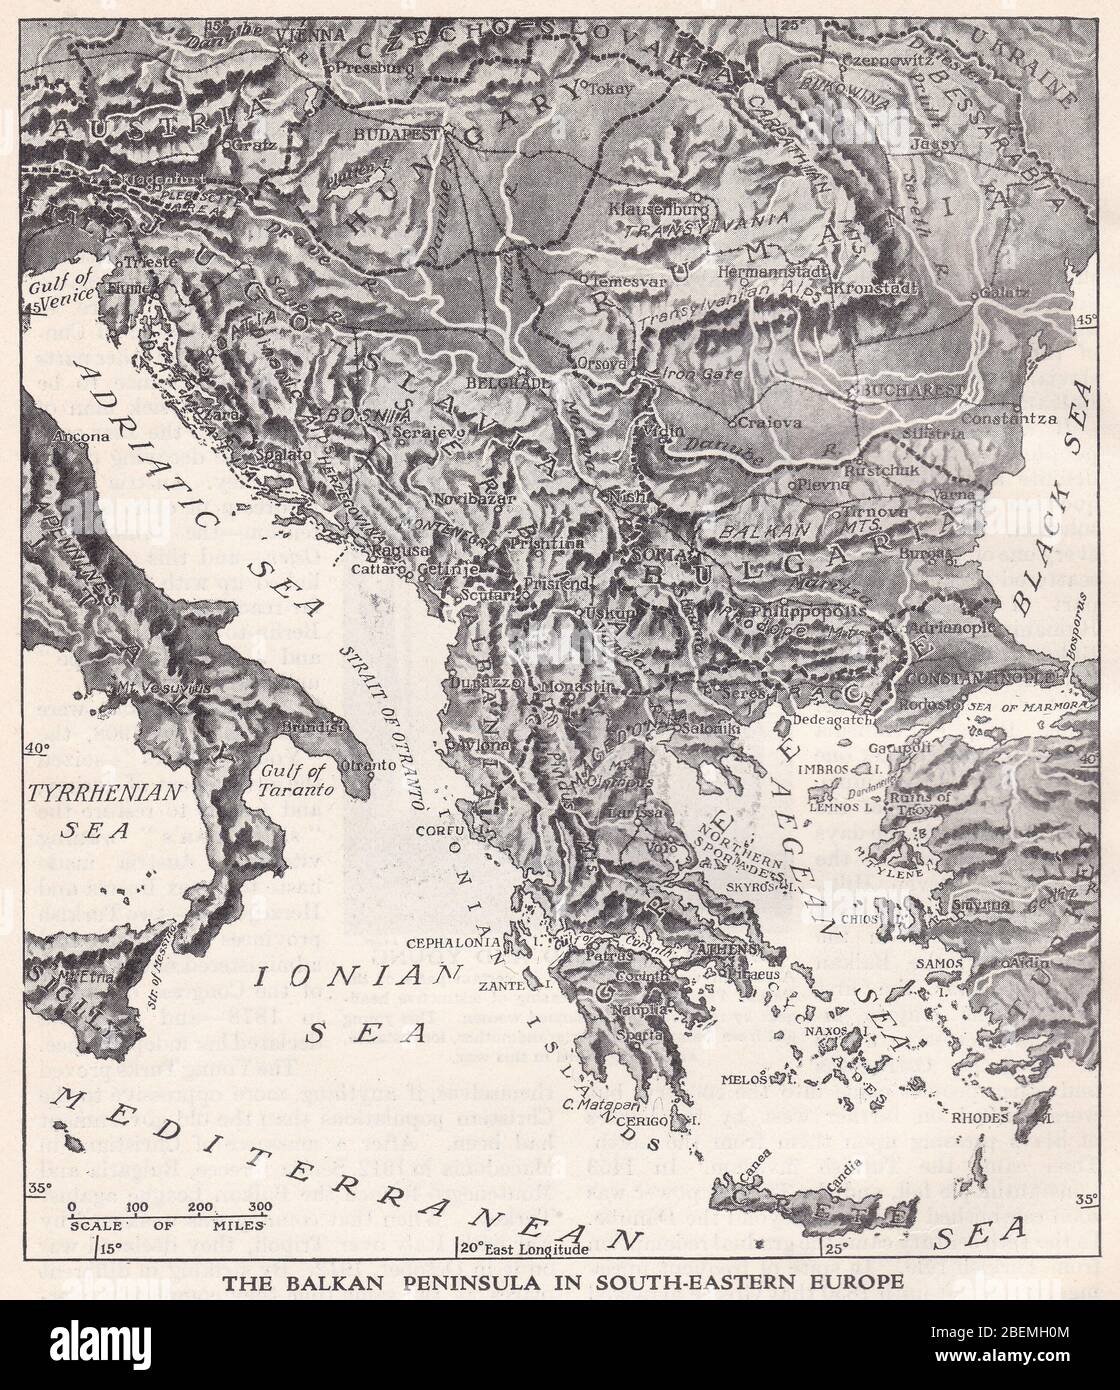 Vintage 1930s map of The Balkan Peninsula in South-Eastern Europe. Stock Photo